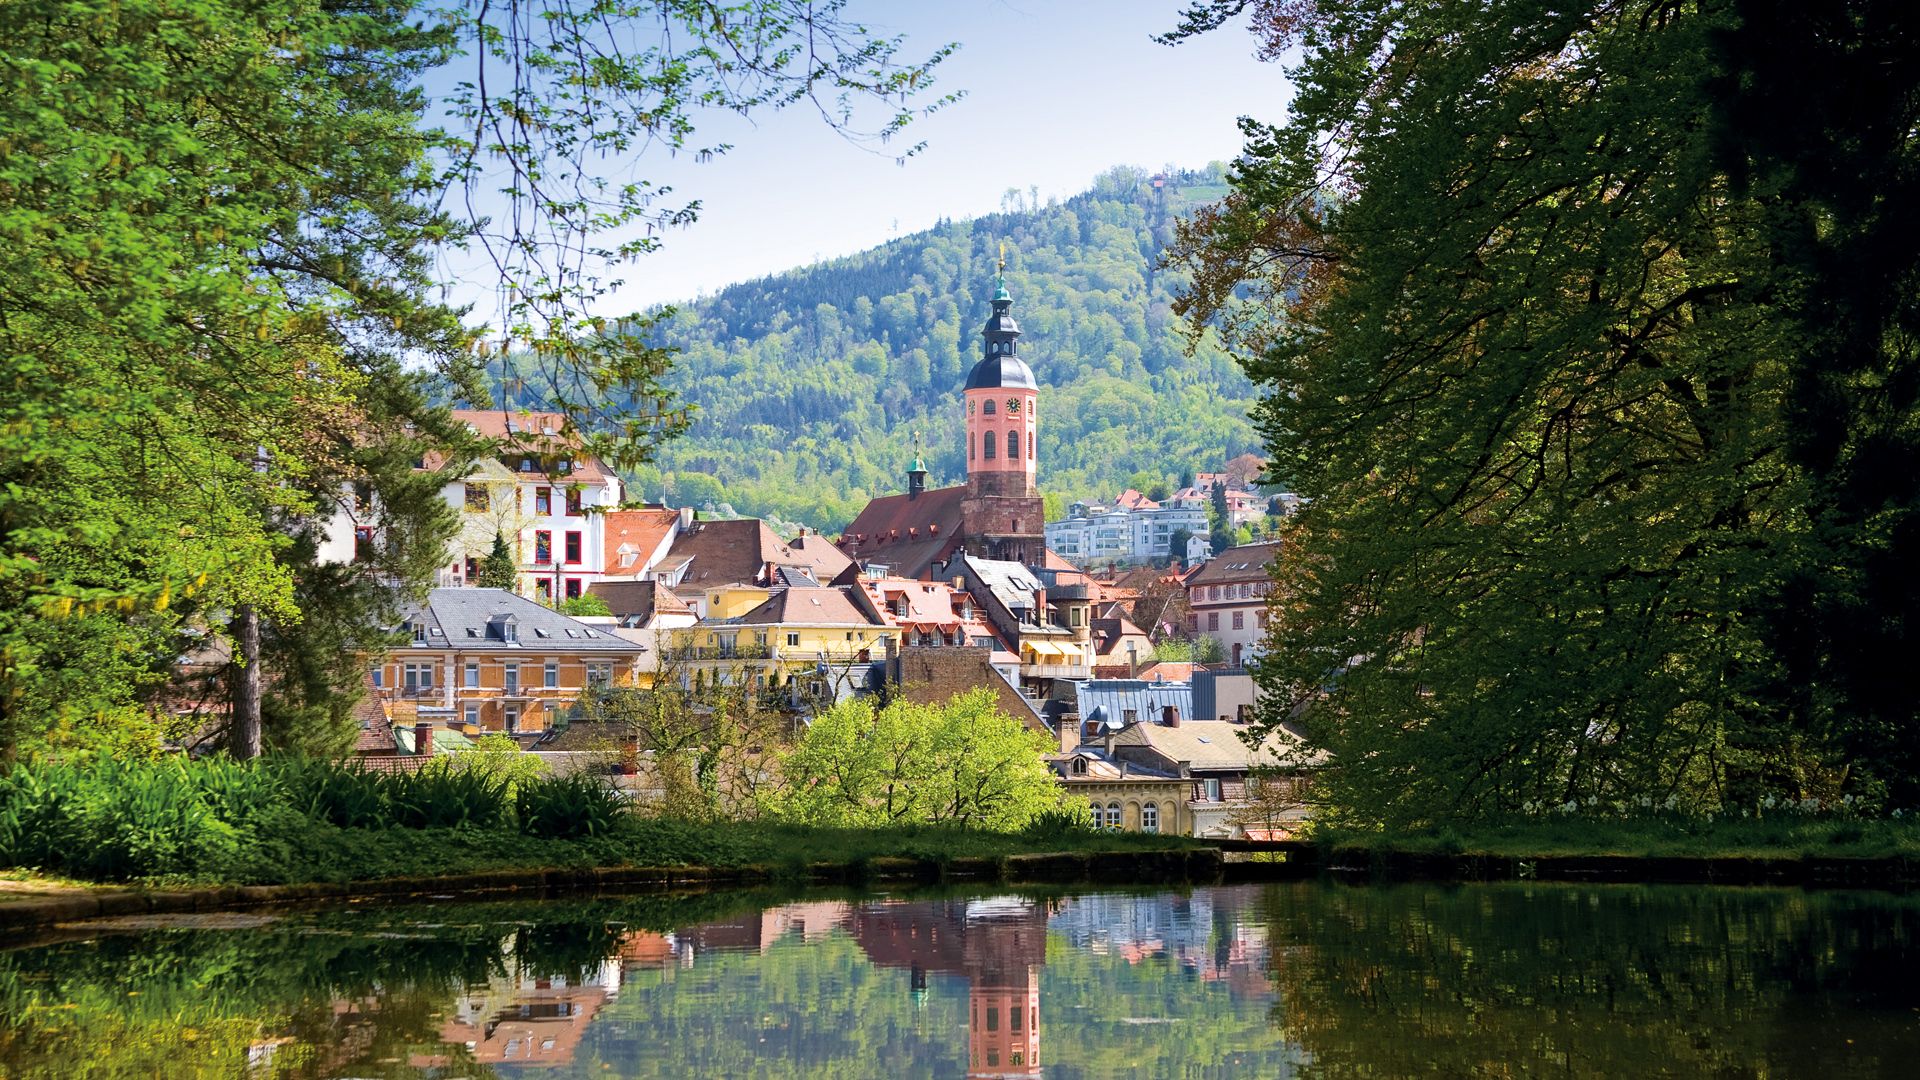 view of the town of Baden-baden